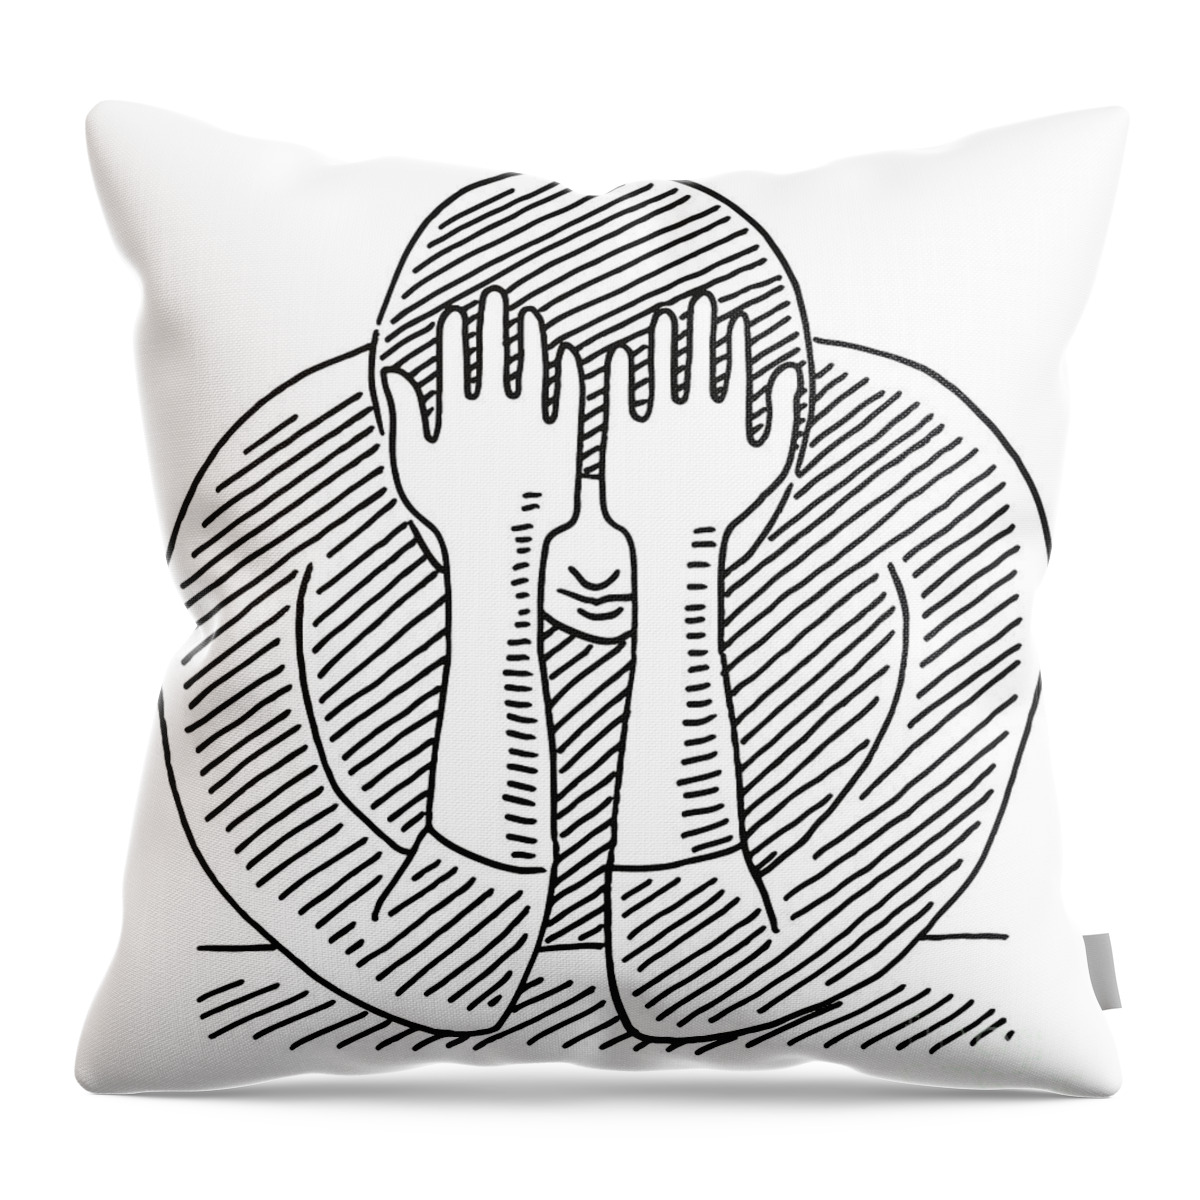 Sketch Throw Pillow featuring the drawing Sad Person Depression Concept Drawing by Frank Ramspott